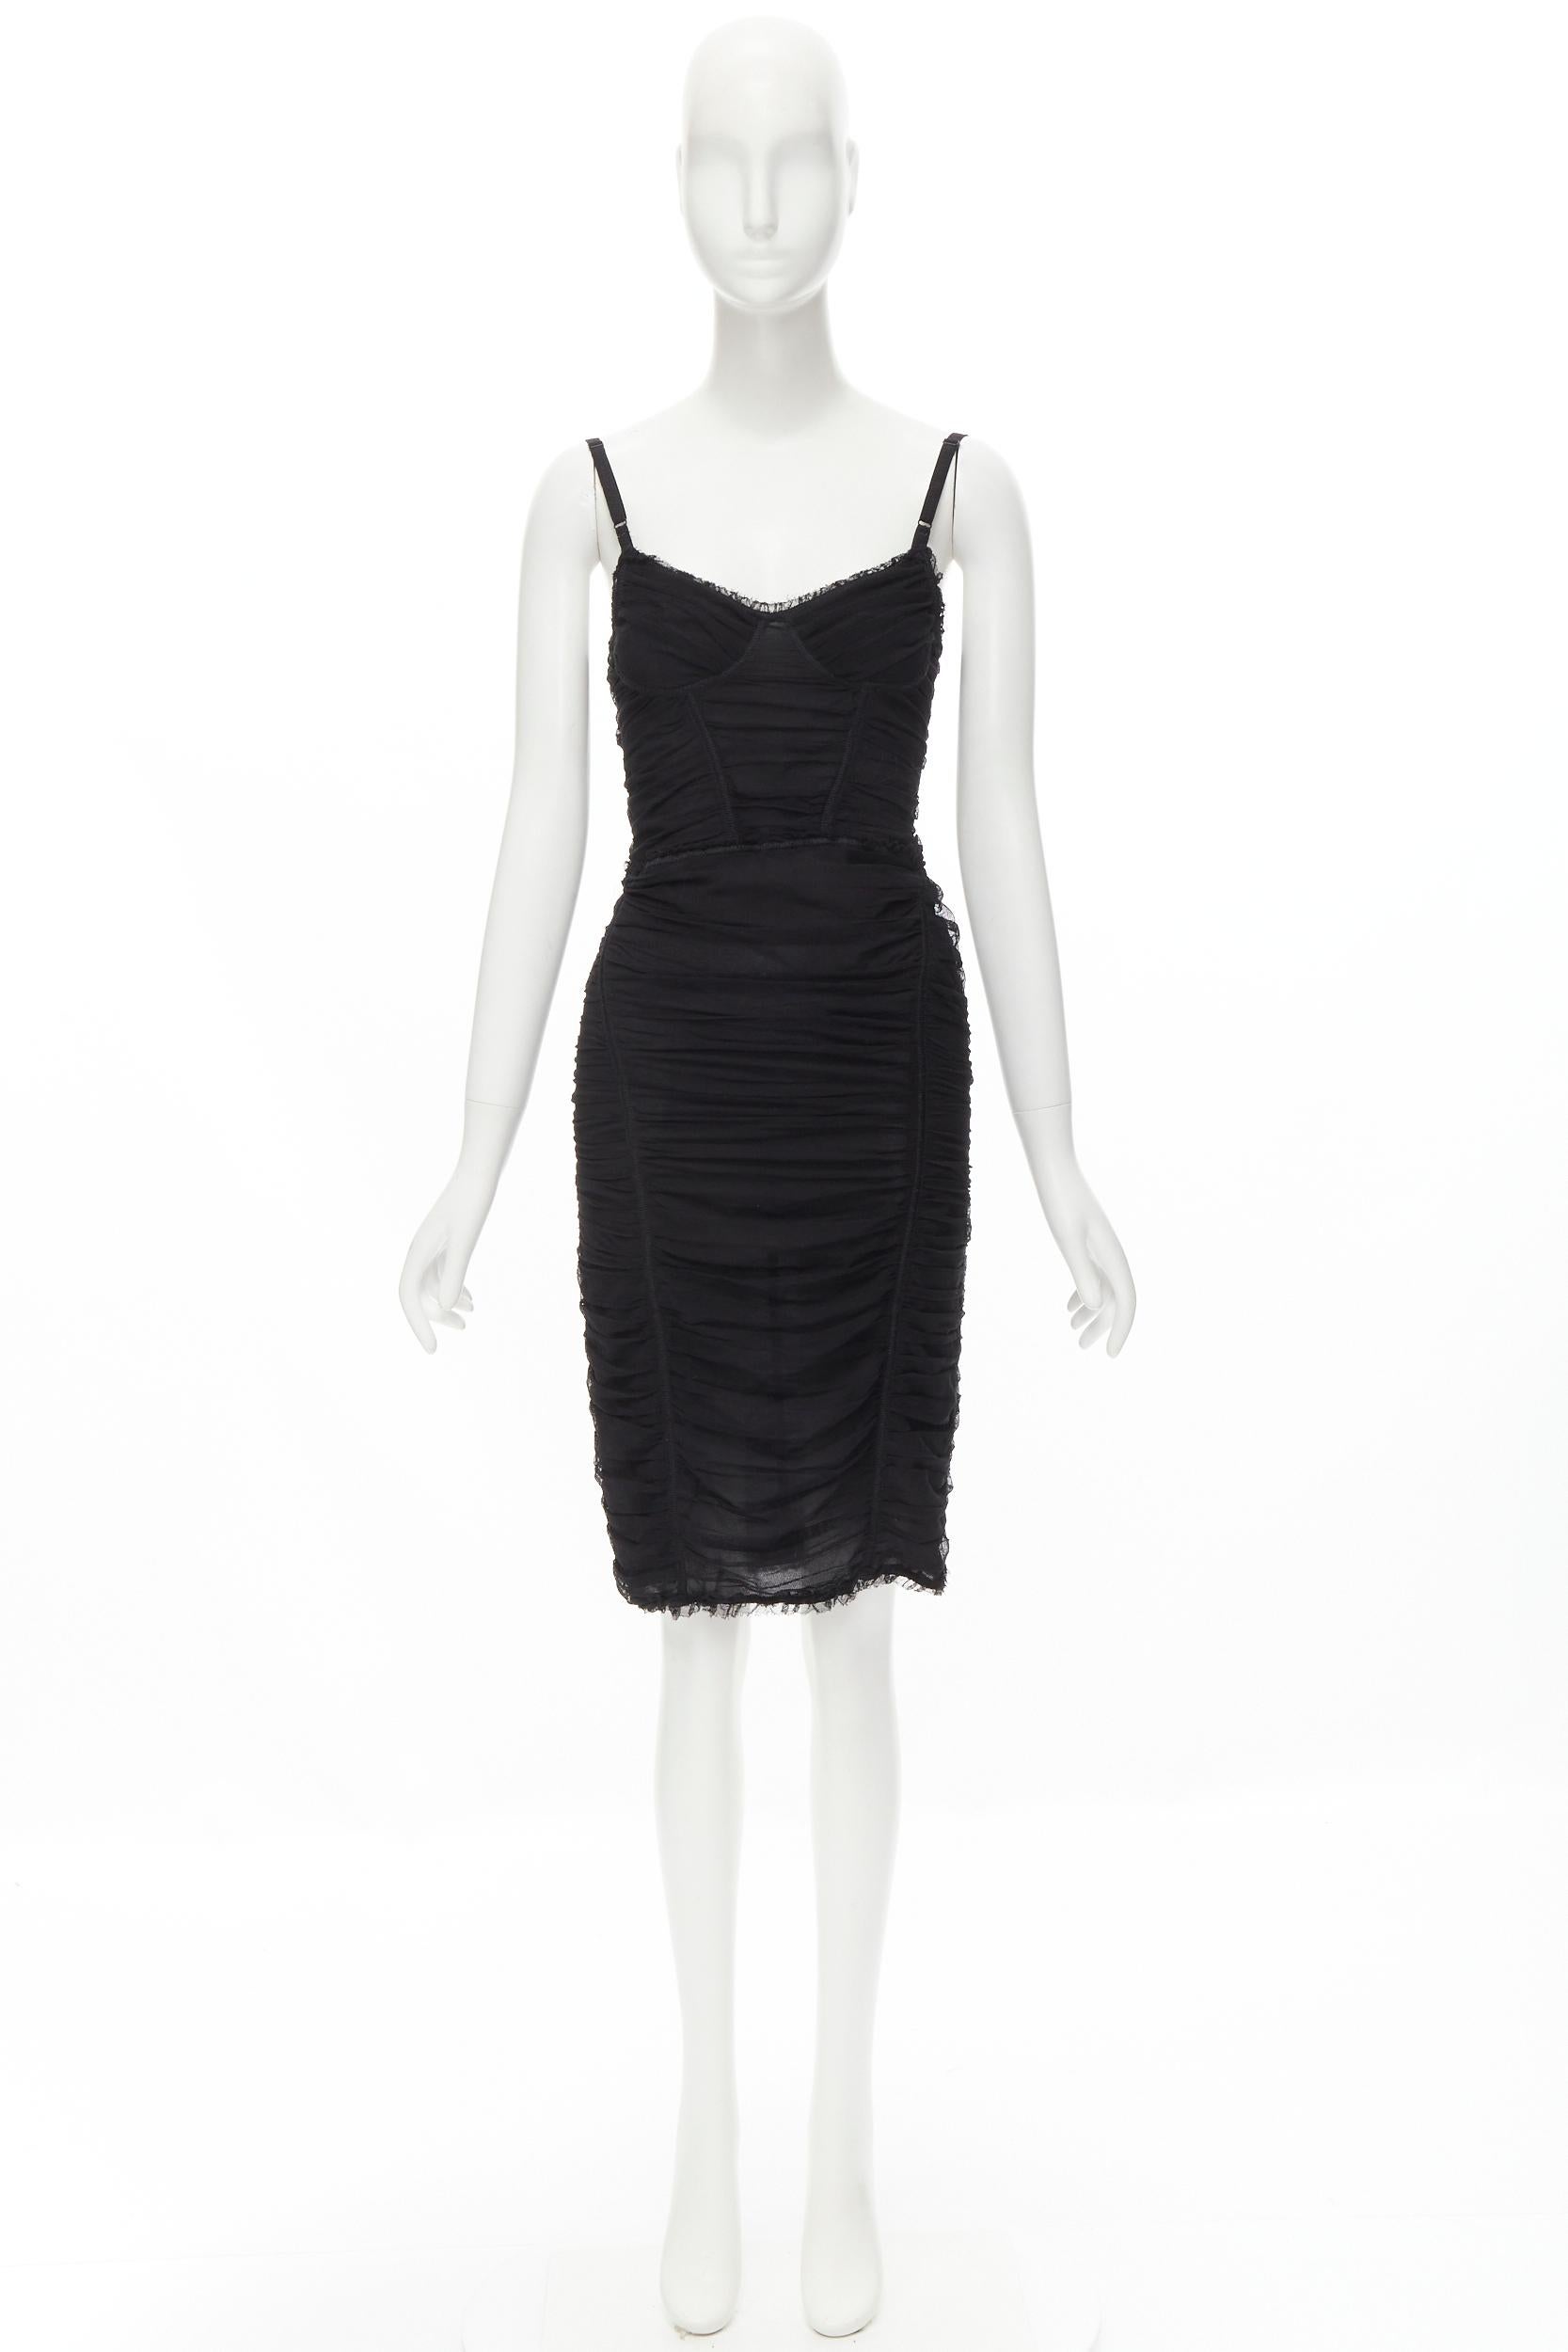 D&G DOLCE GABBANA black ruched tulle cocktail dress IT40 S 2